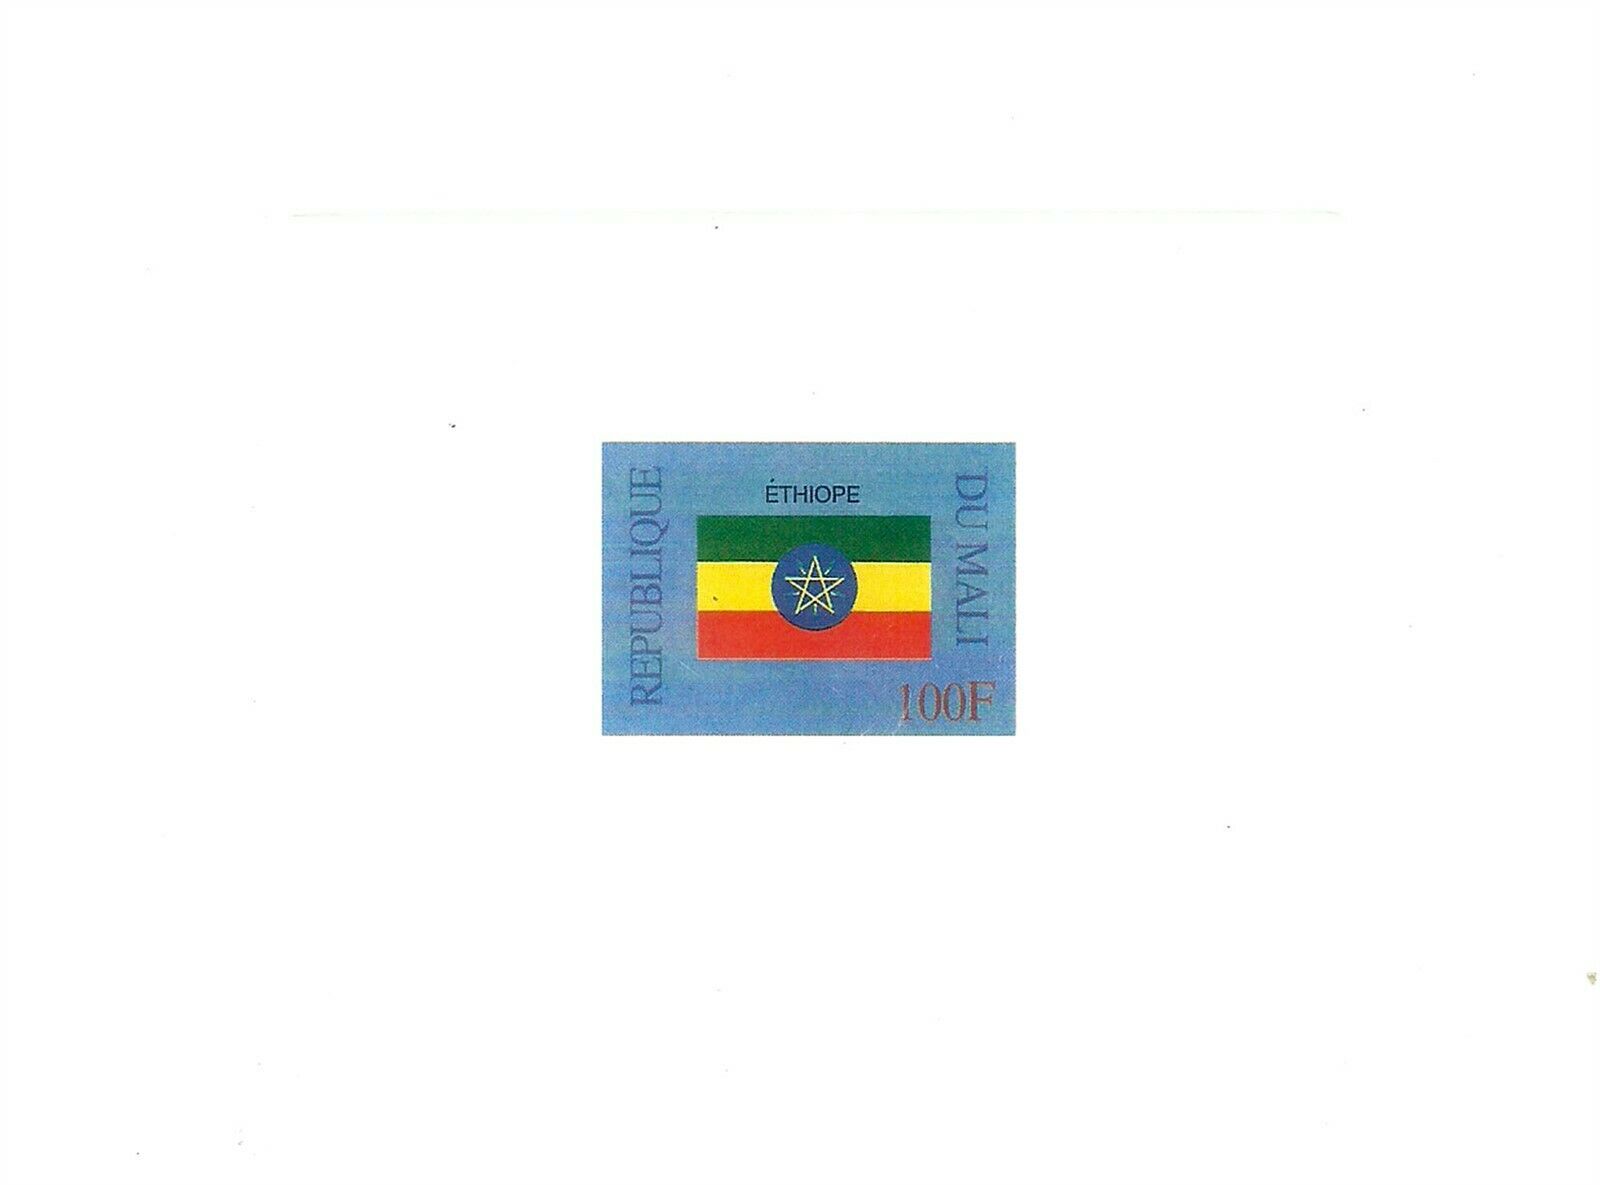 Michel 2360 Ethiopia Flags Mnh - Imperf Bloc Luxe On Card - Free Shipping